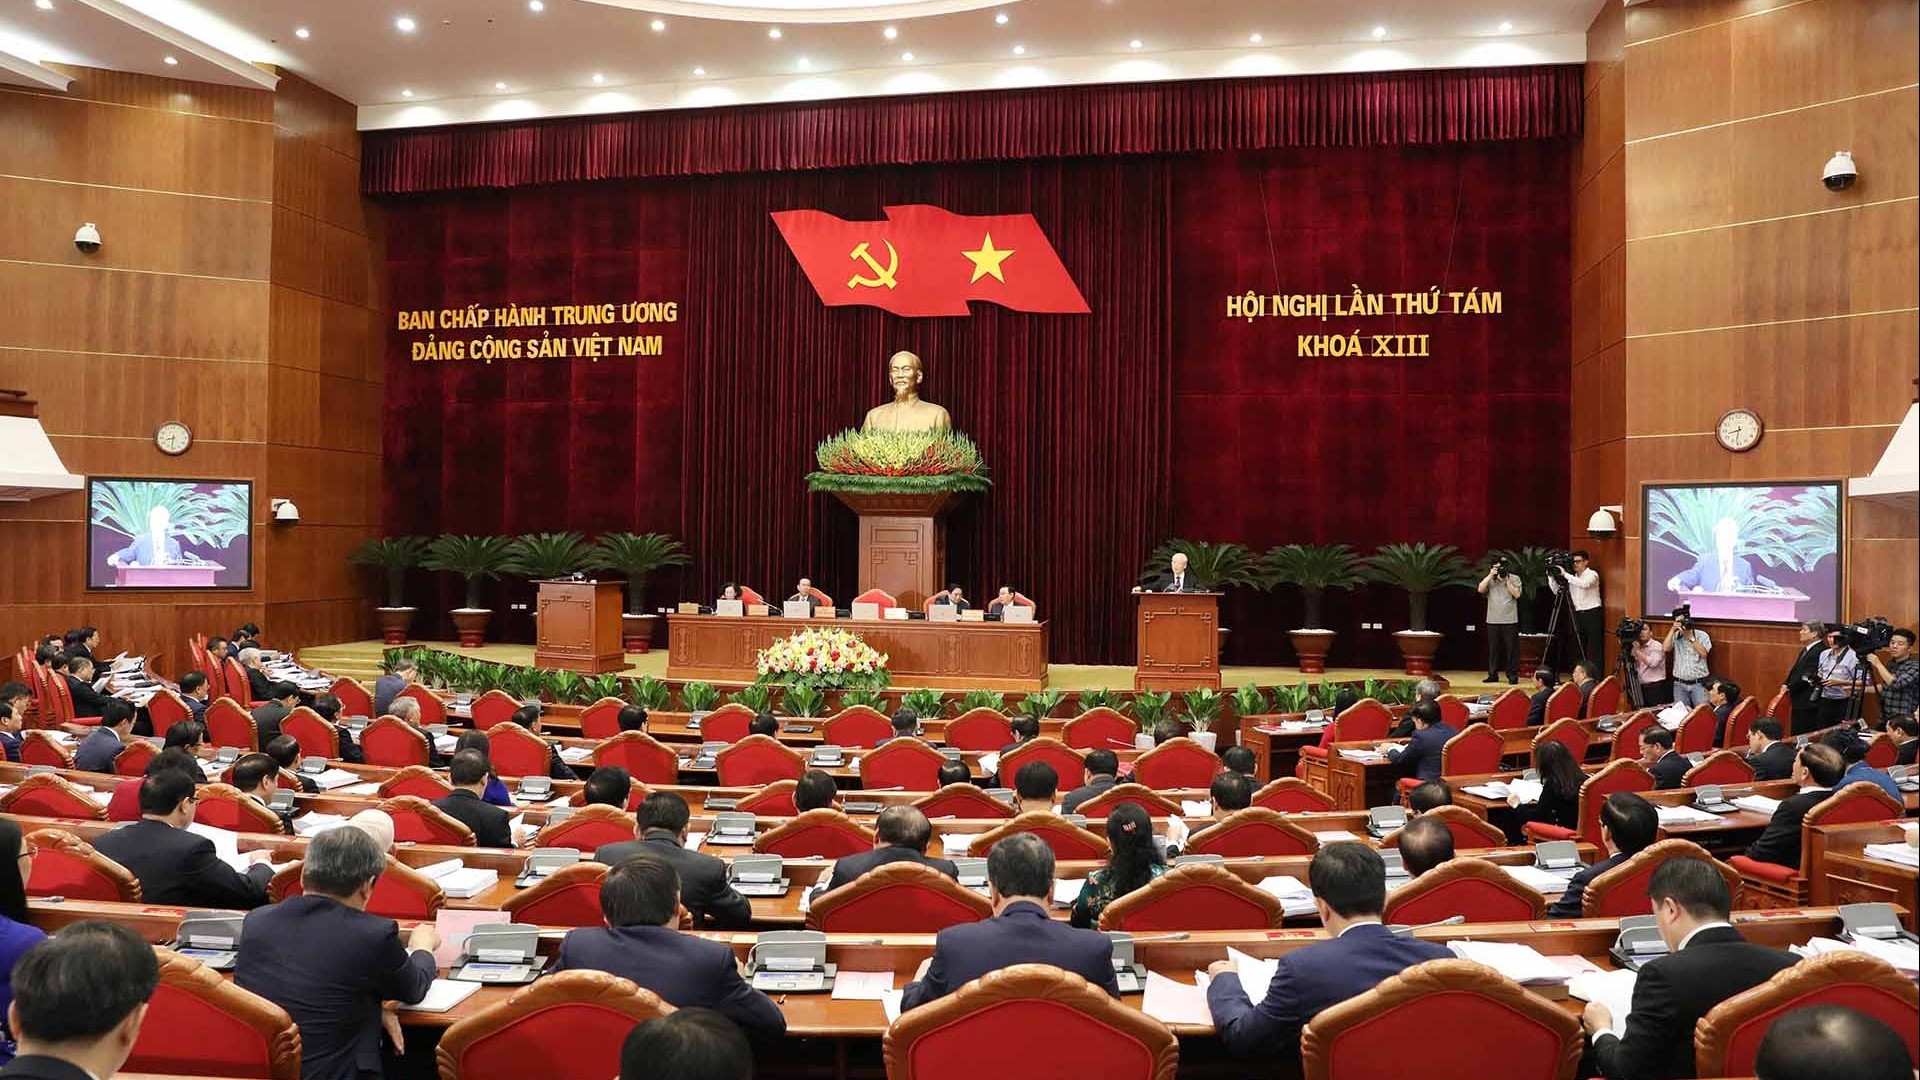 13th Party Central Committee’s 8th plenum: New members to Secretariat and Inspection Commission elected